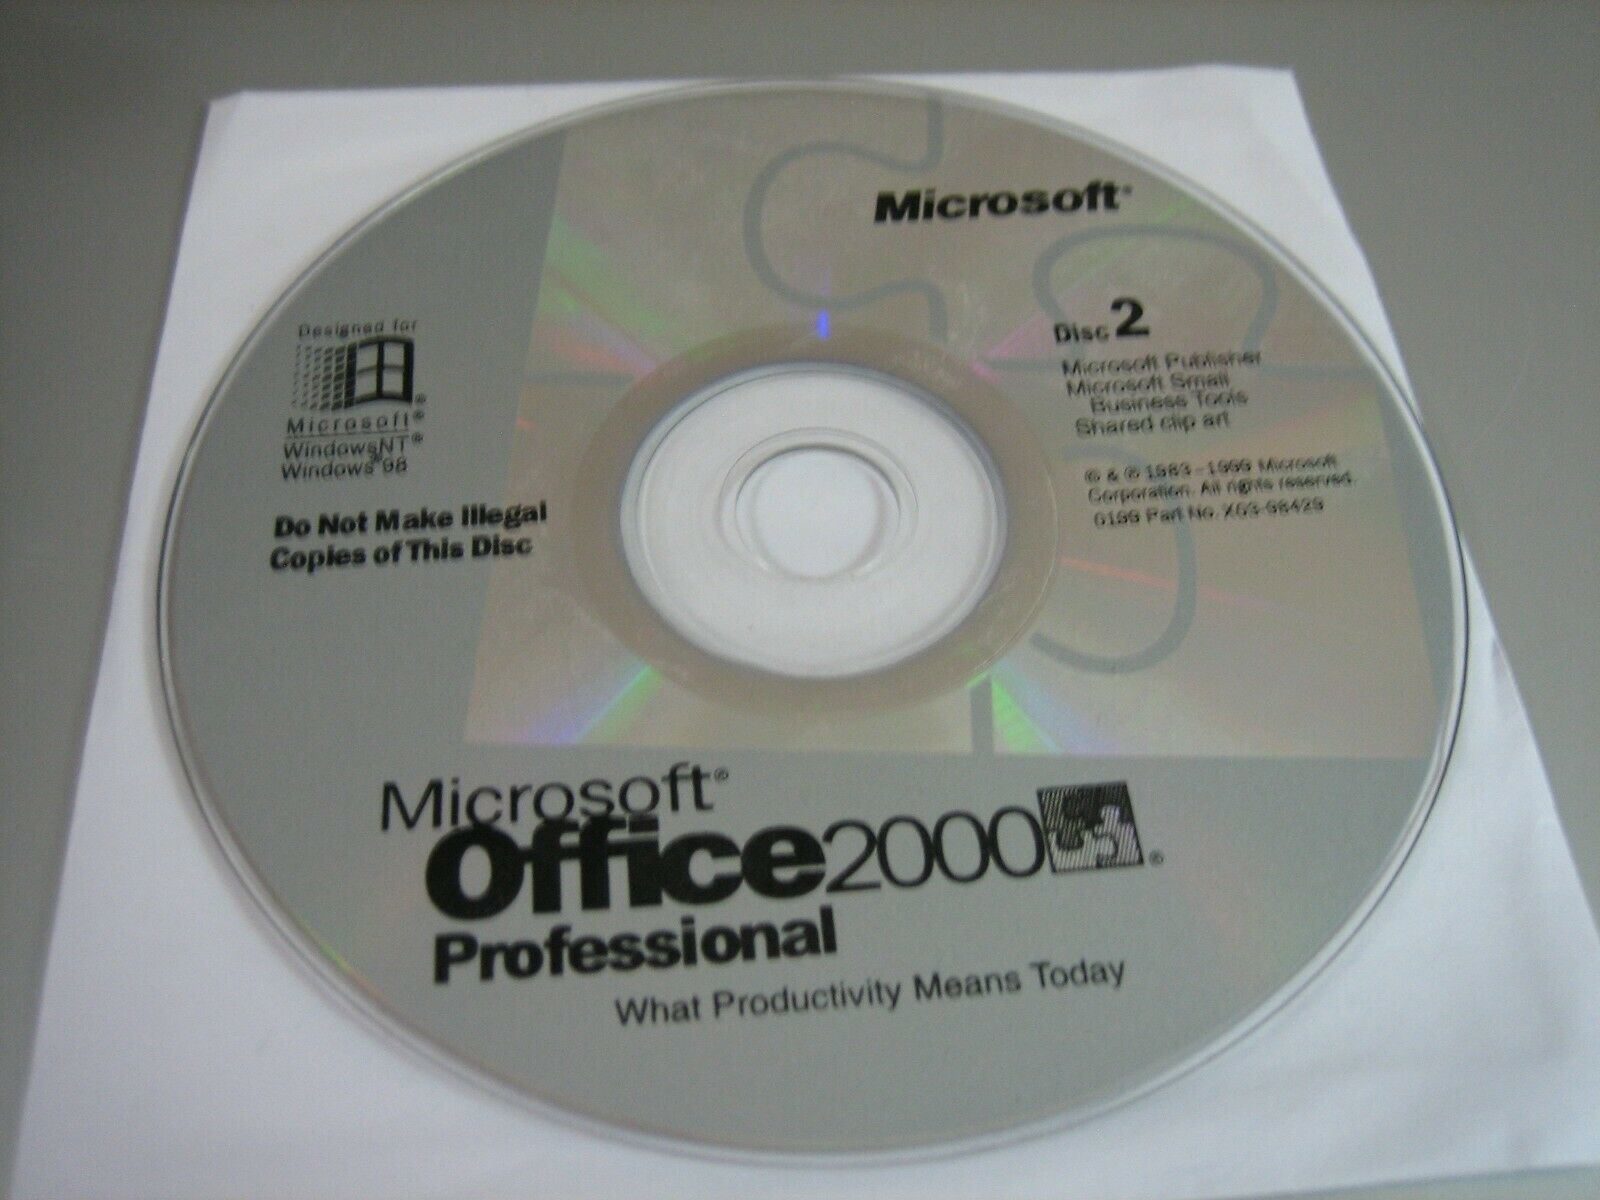 Microsoft Office 2000 Professional for and 50 similar items